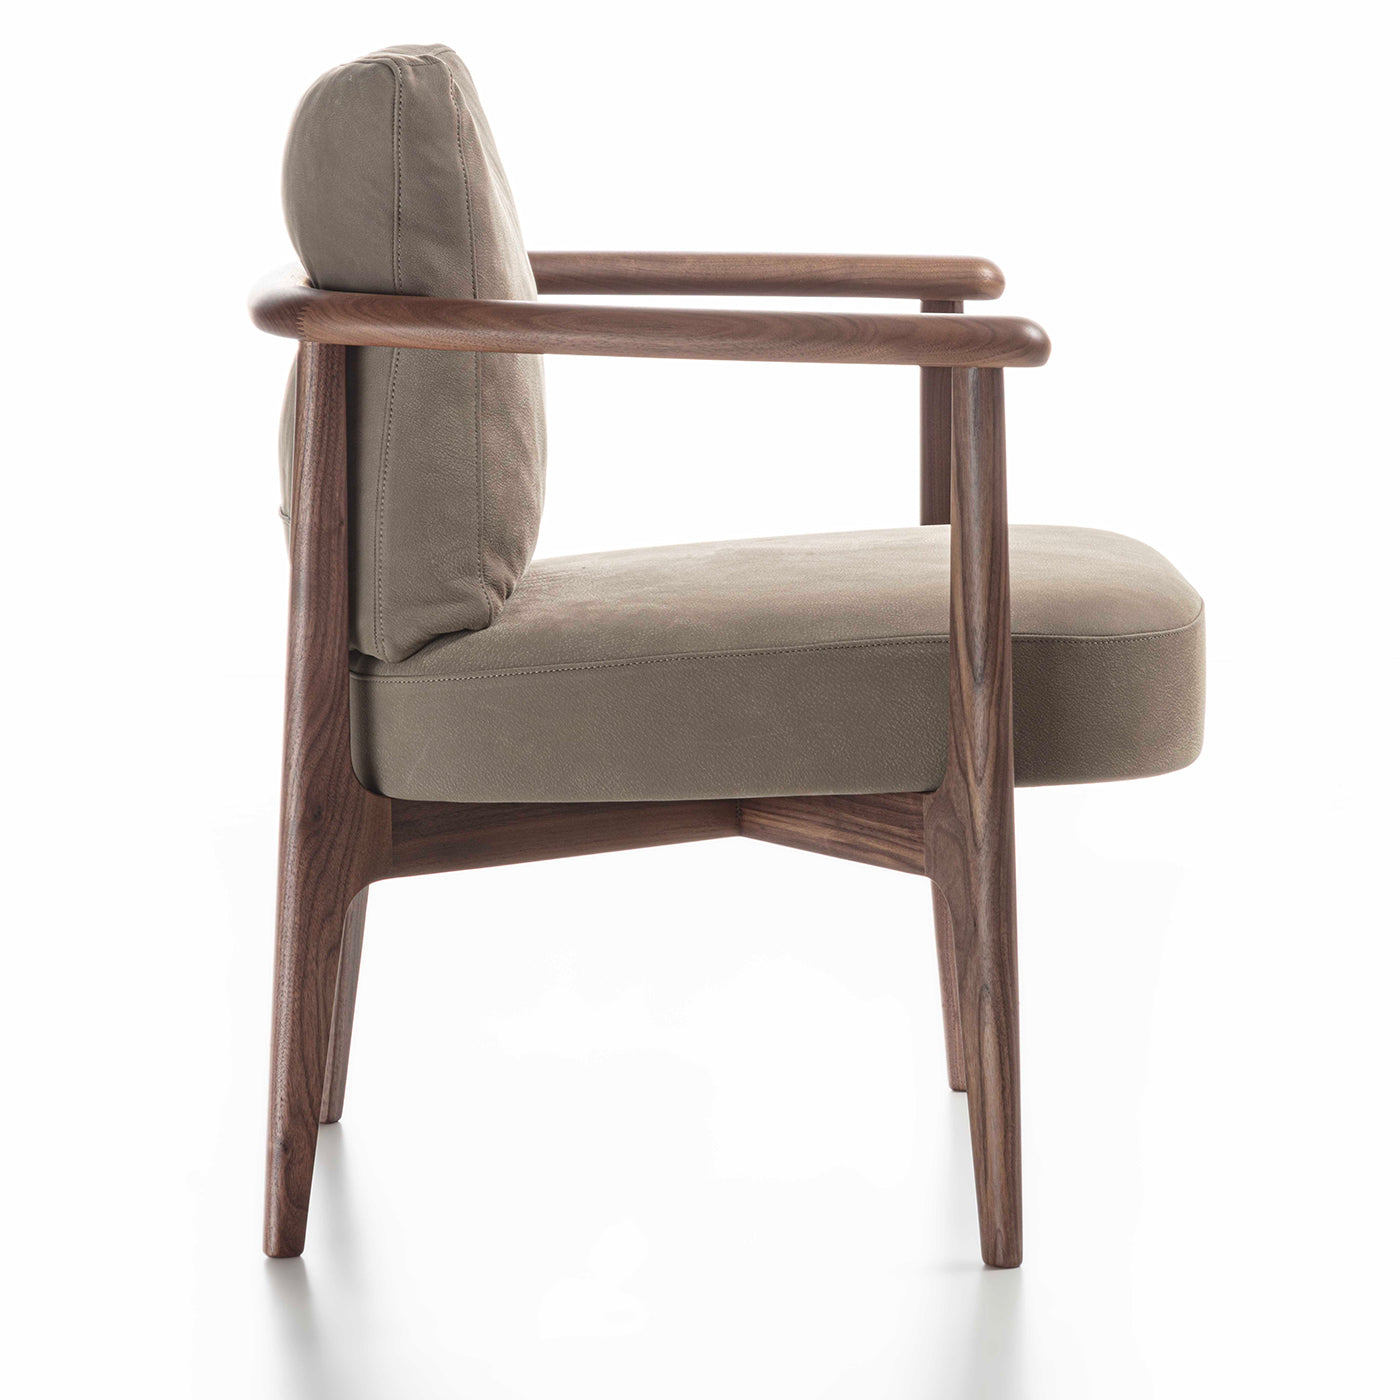 Greta Canaletto Walnut & Gray Leather Lounge Chair With Arms - Alternative view 3